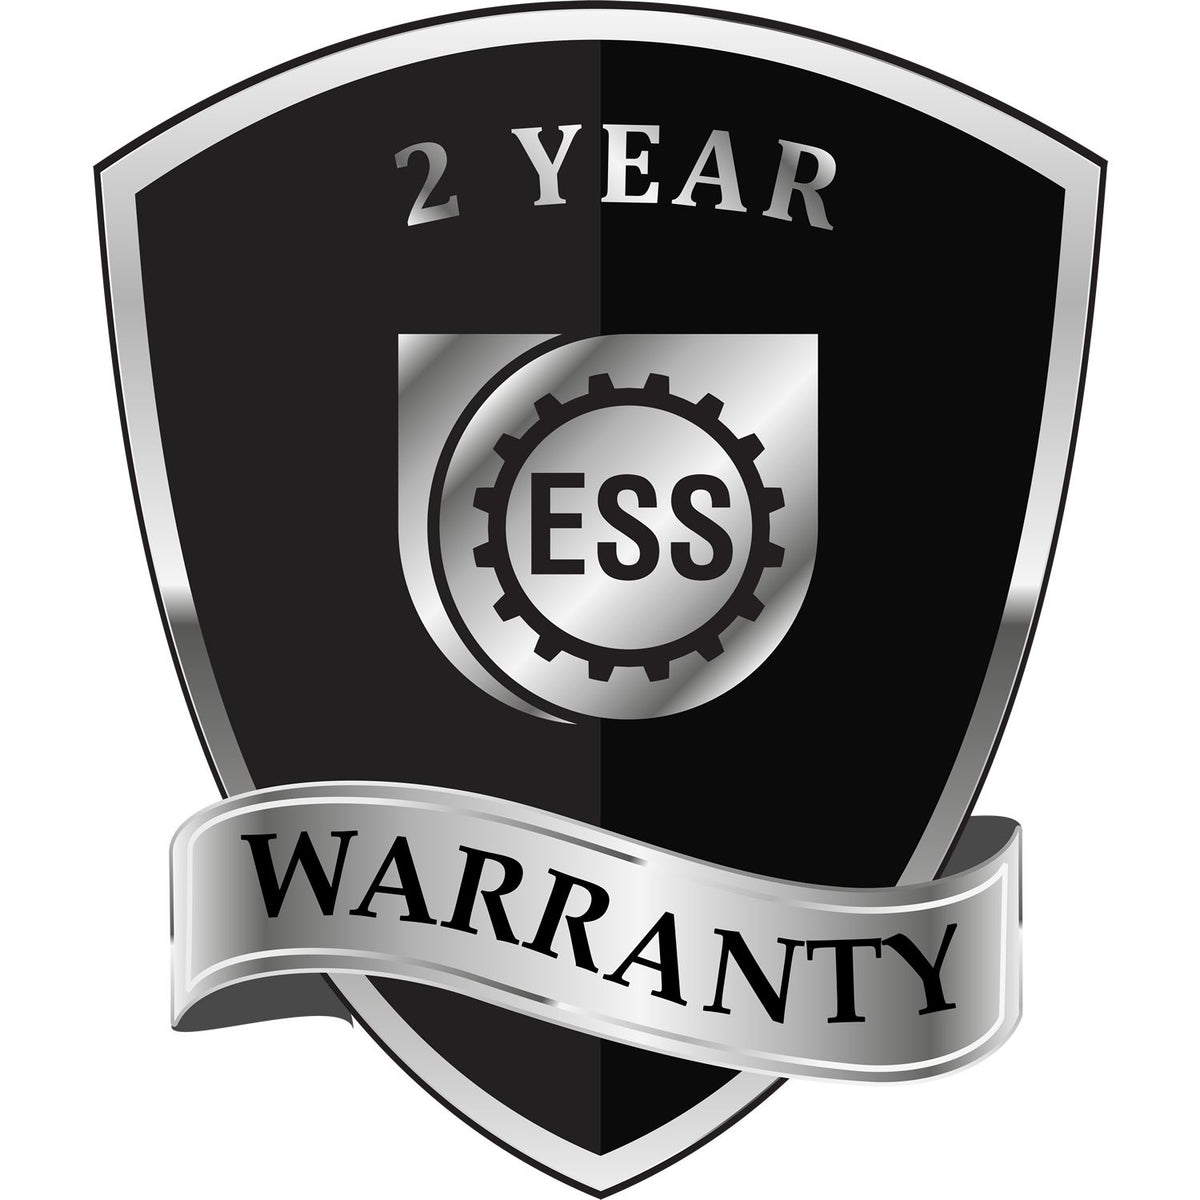 A black and silver badge or emblem showing warranty information for the Gift Michigan Engineer Seal